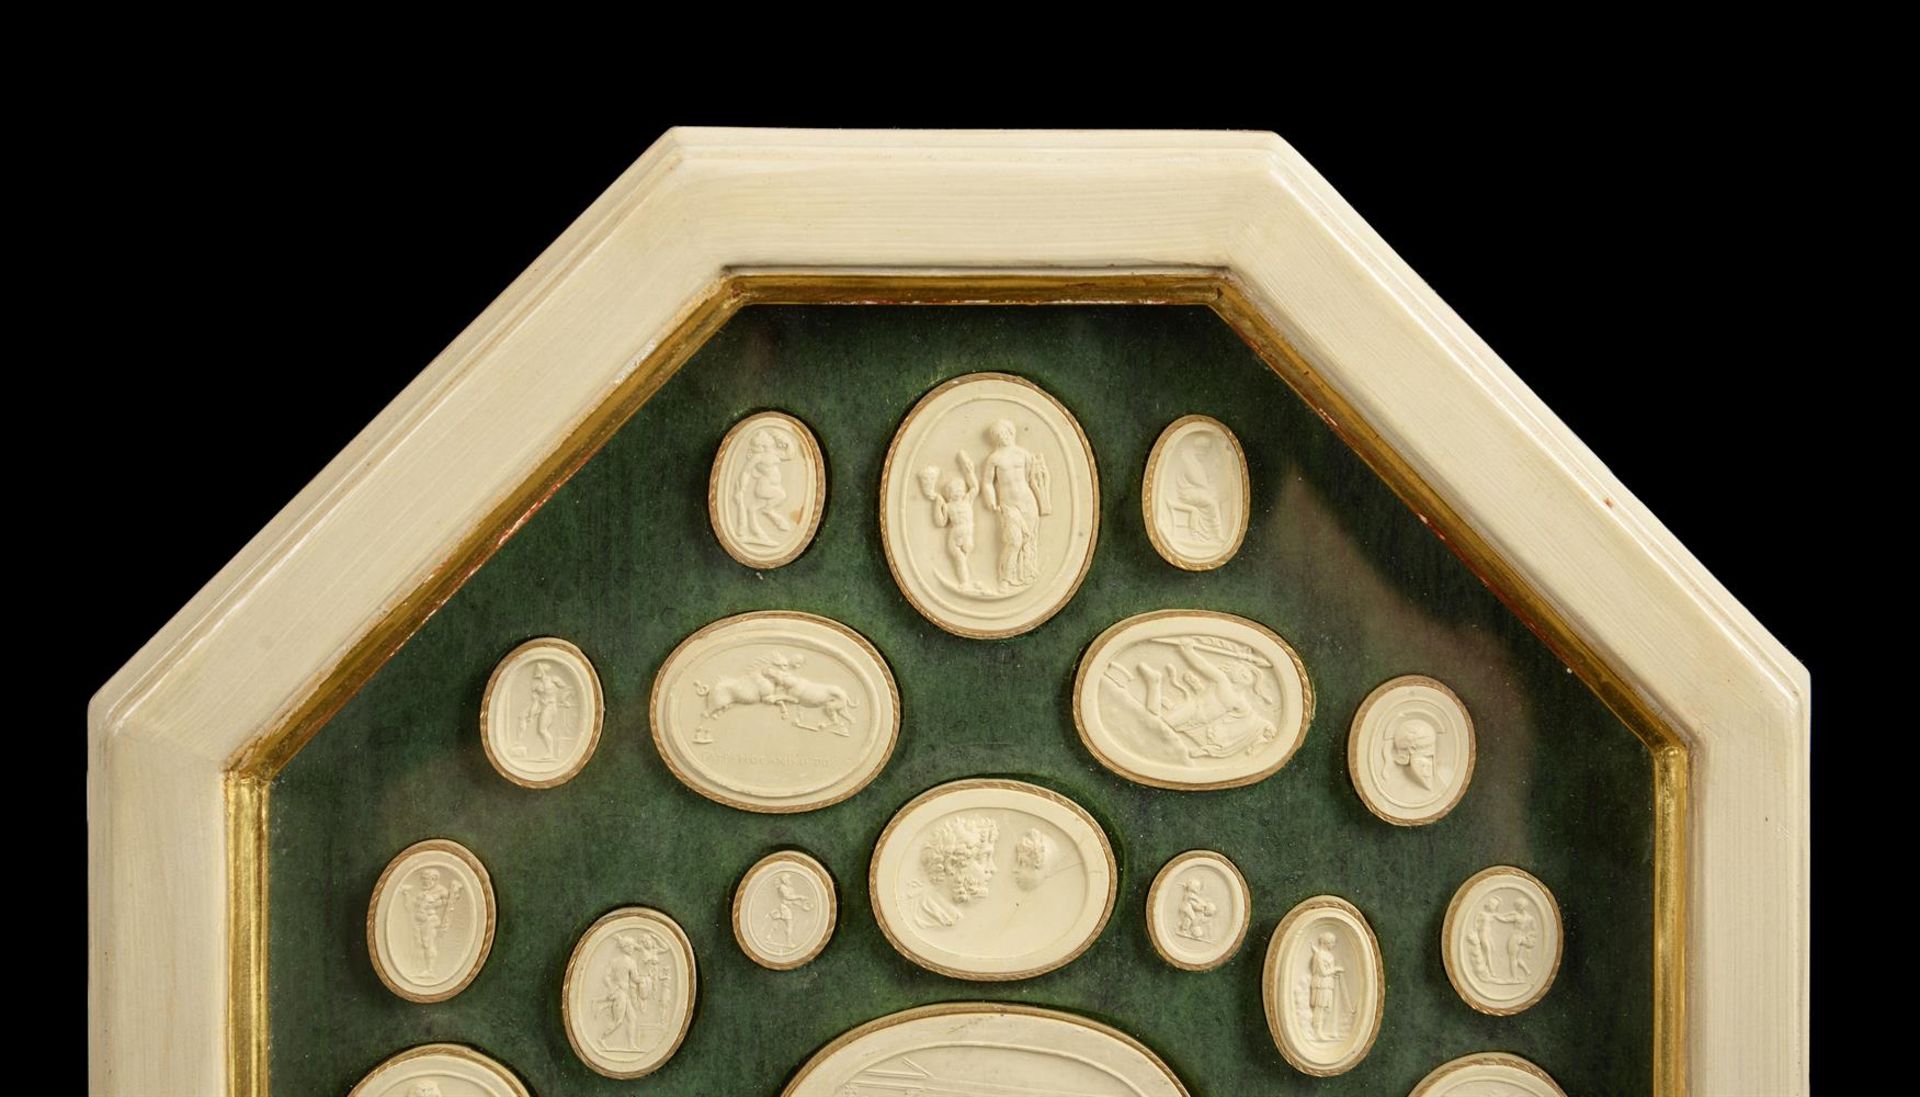 A SET OF FOUR FRAMED SETS OF PLASTER IMPRONTE OR INTAGLIOS, EARLY 19TH CENTURY - Image 2 of 5